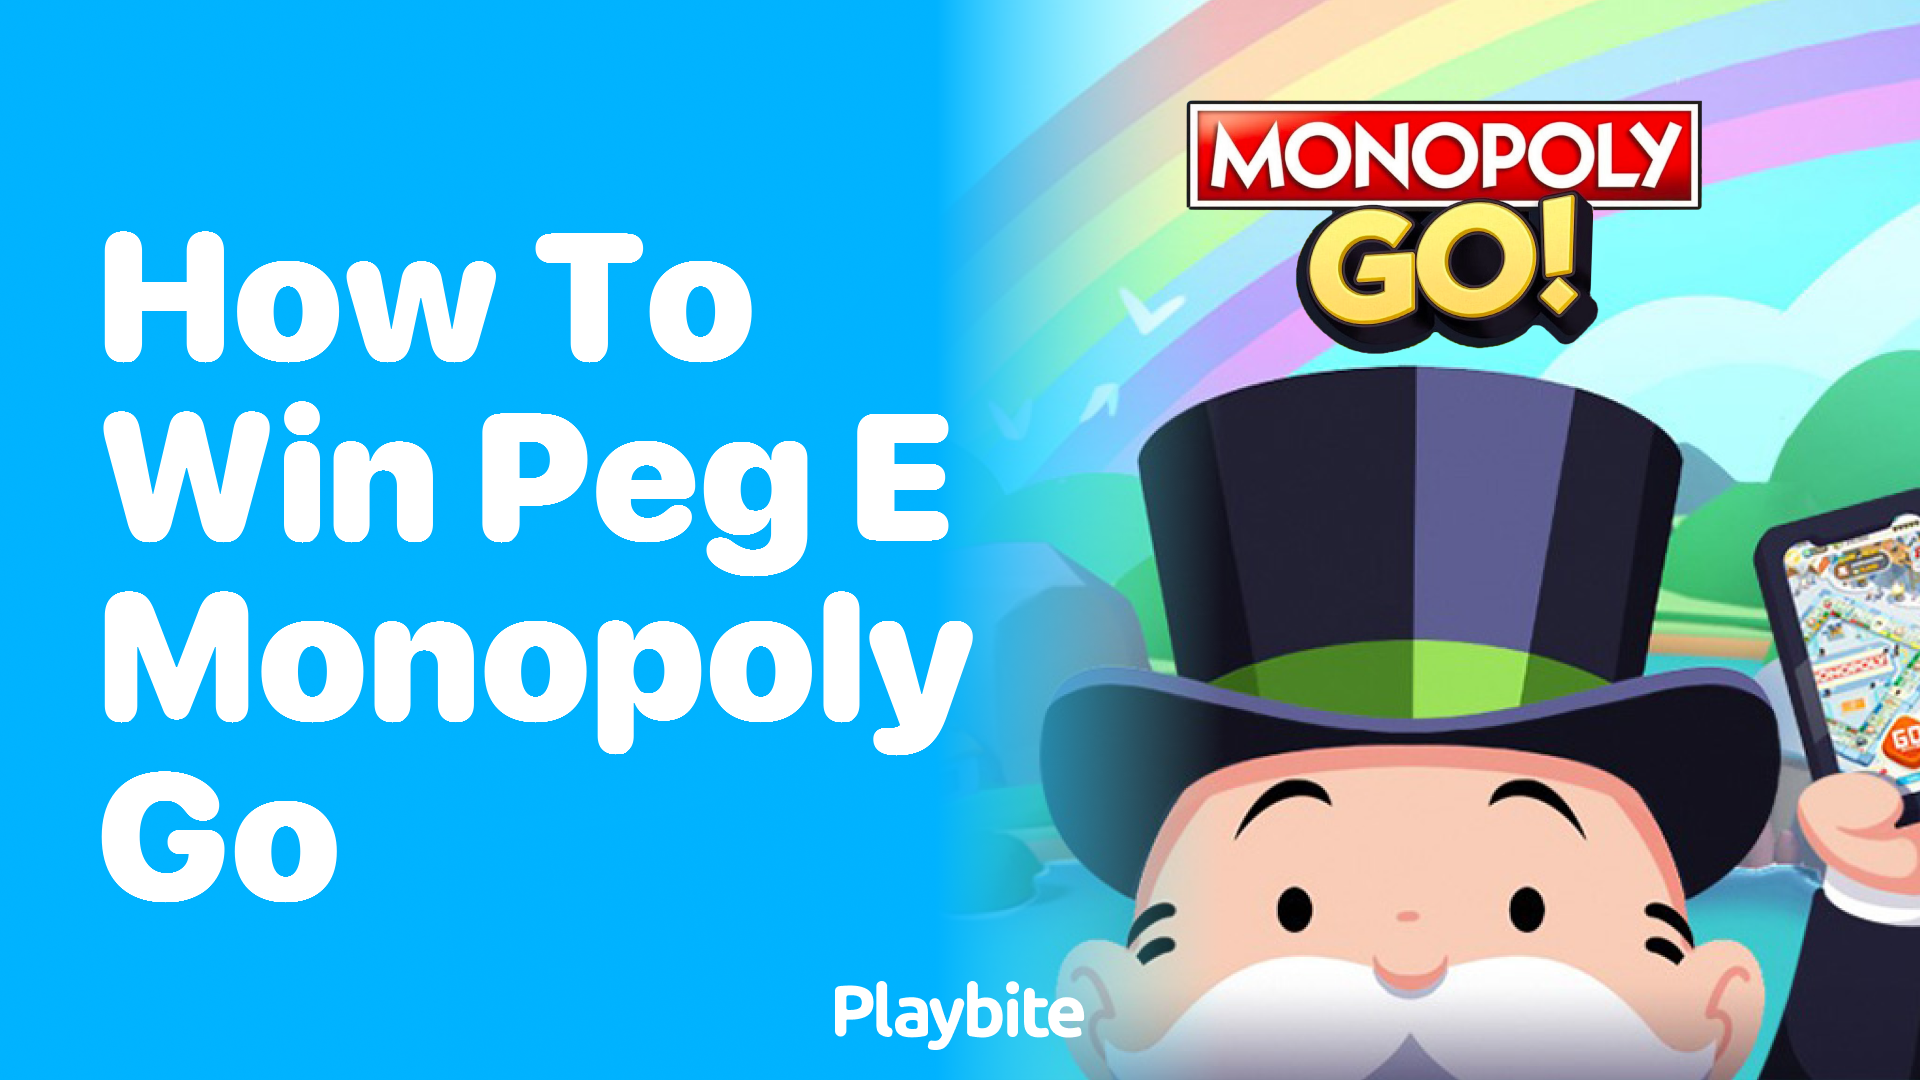 How to Win Big in Monopoly Go